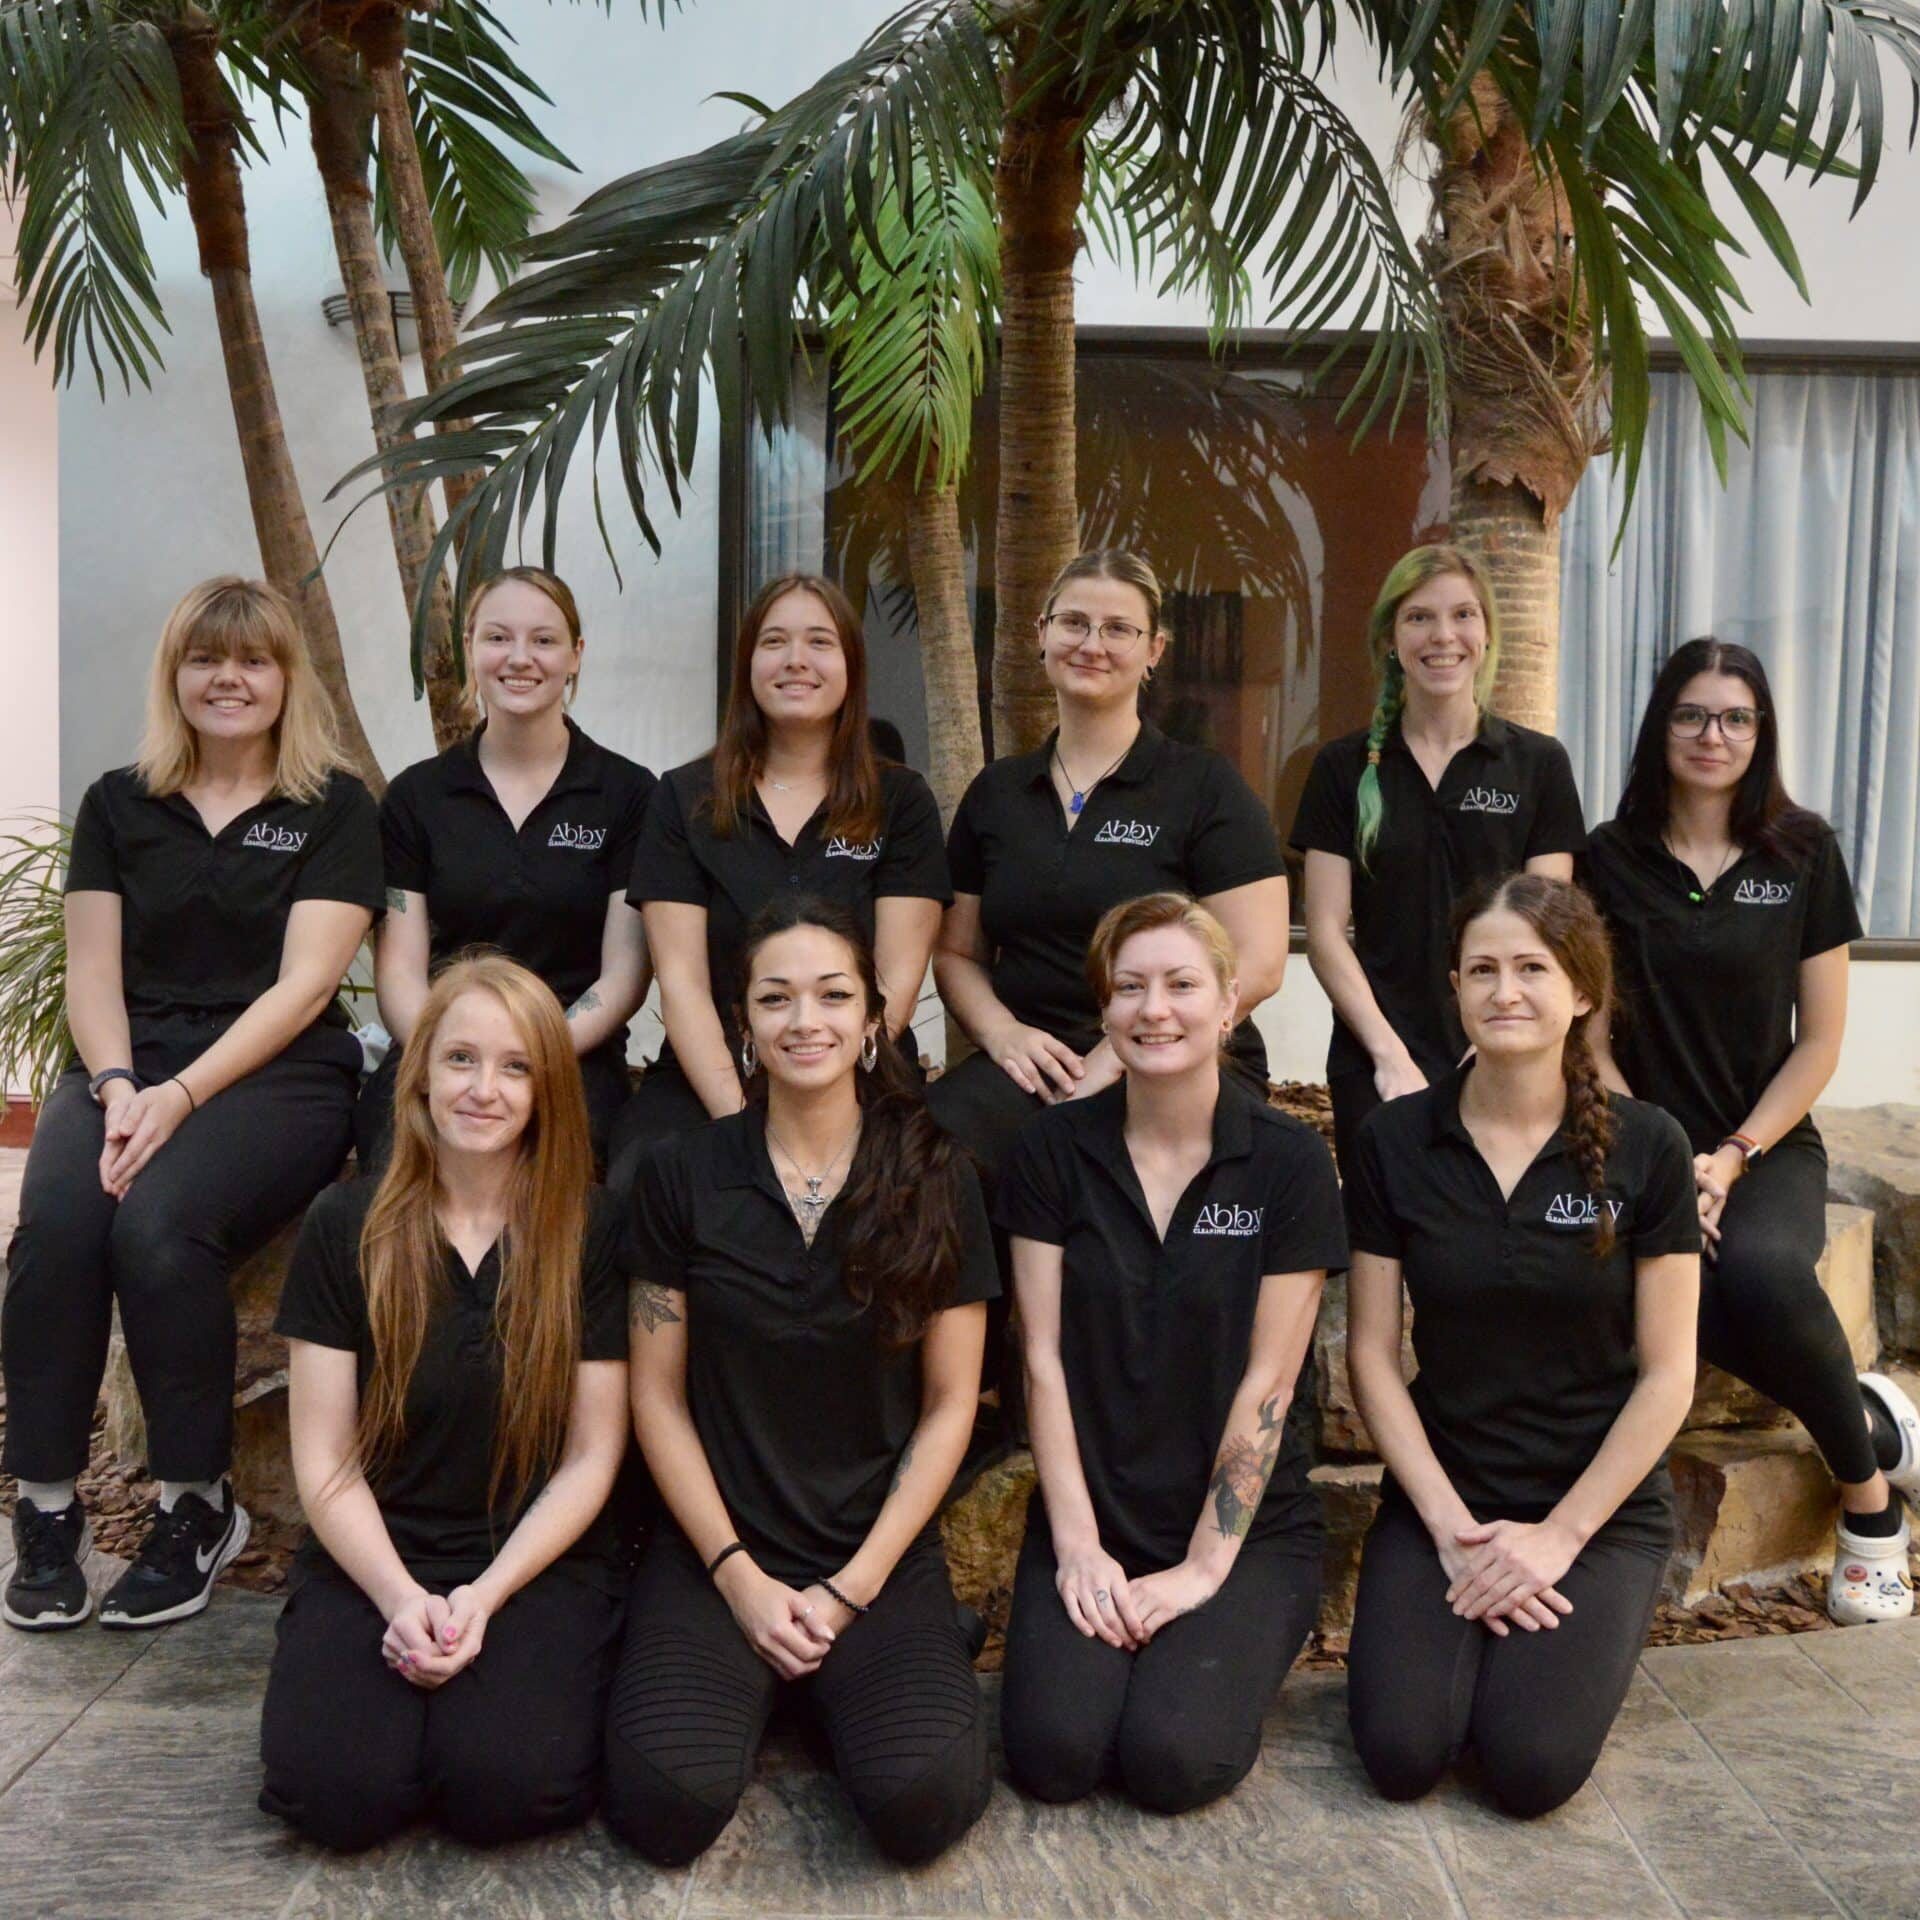 staff photo of the maids from Abby's Cleaning Service